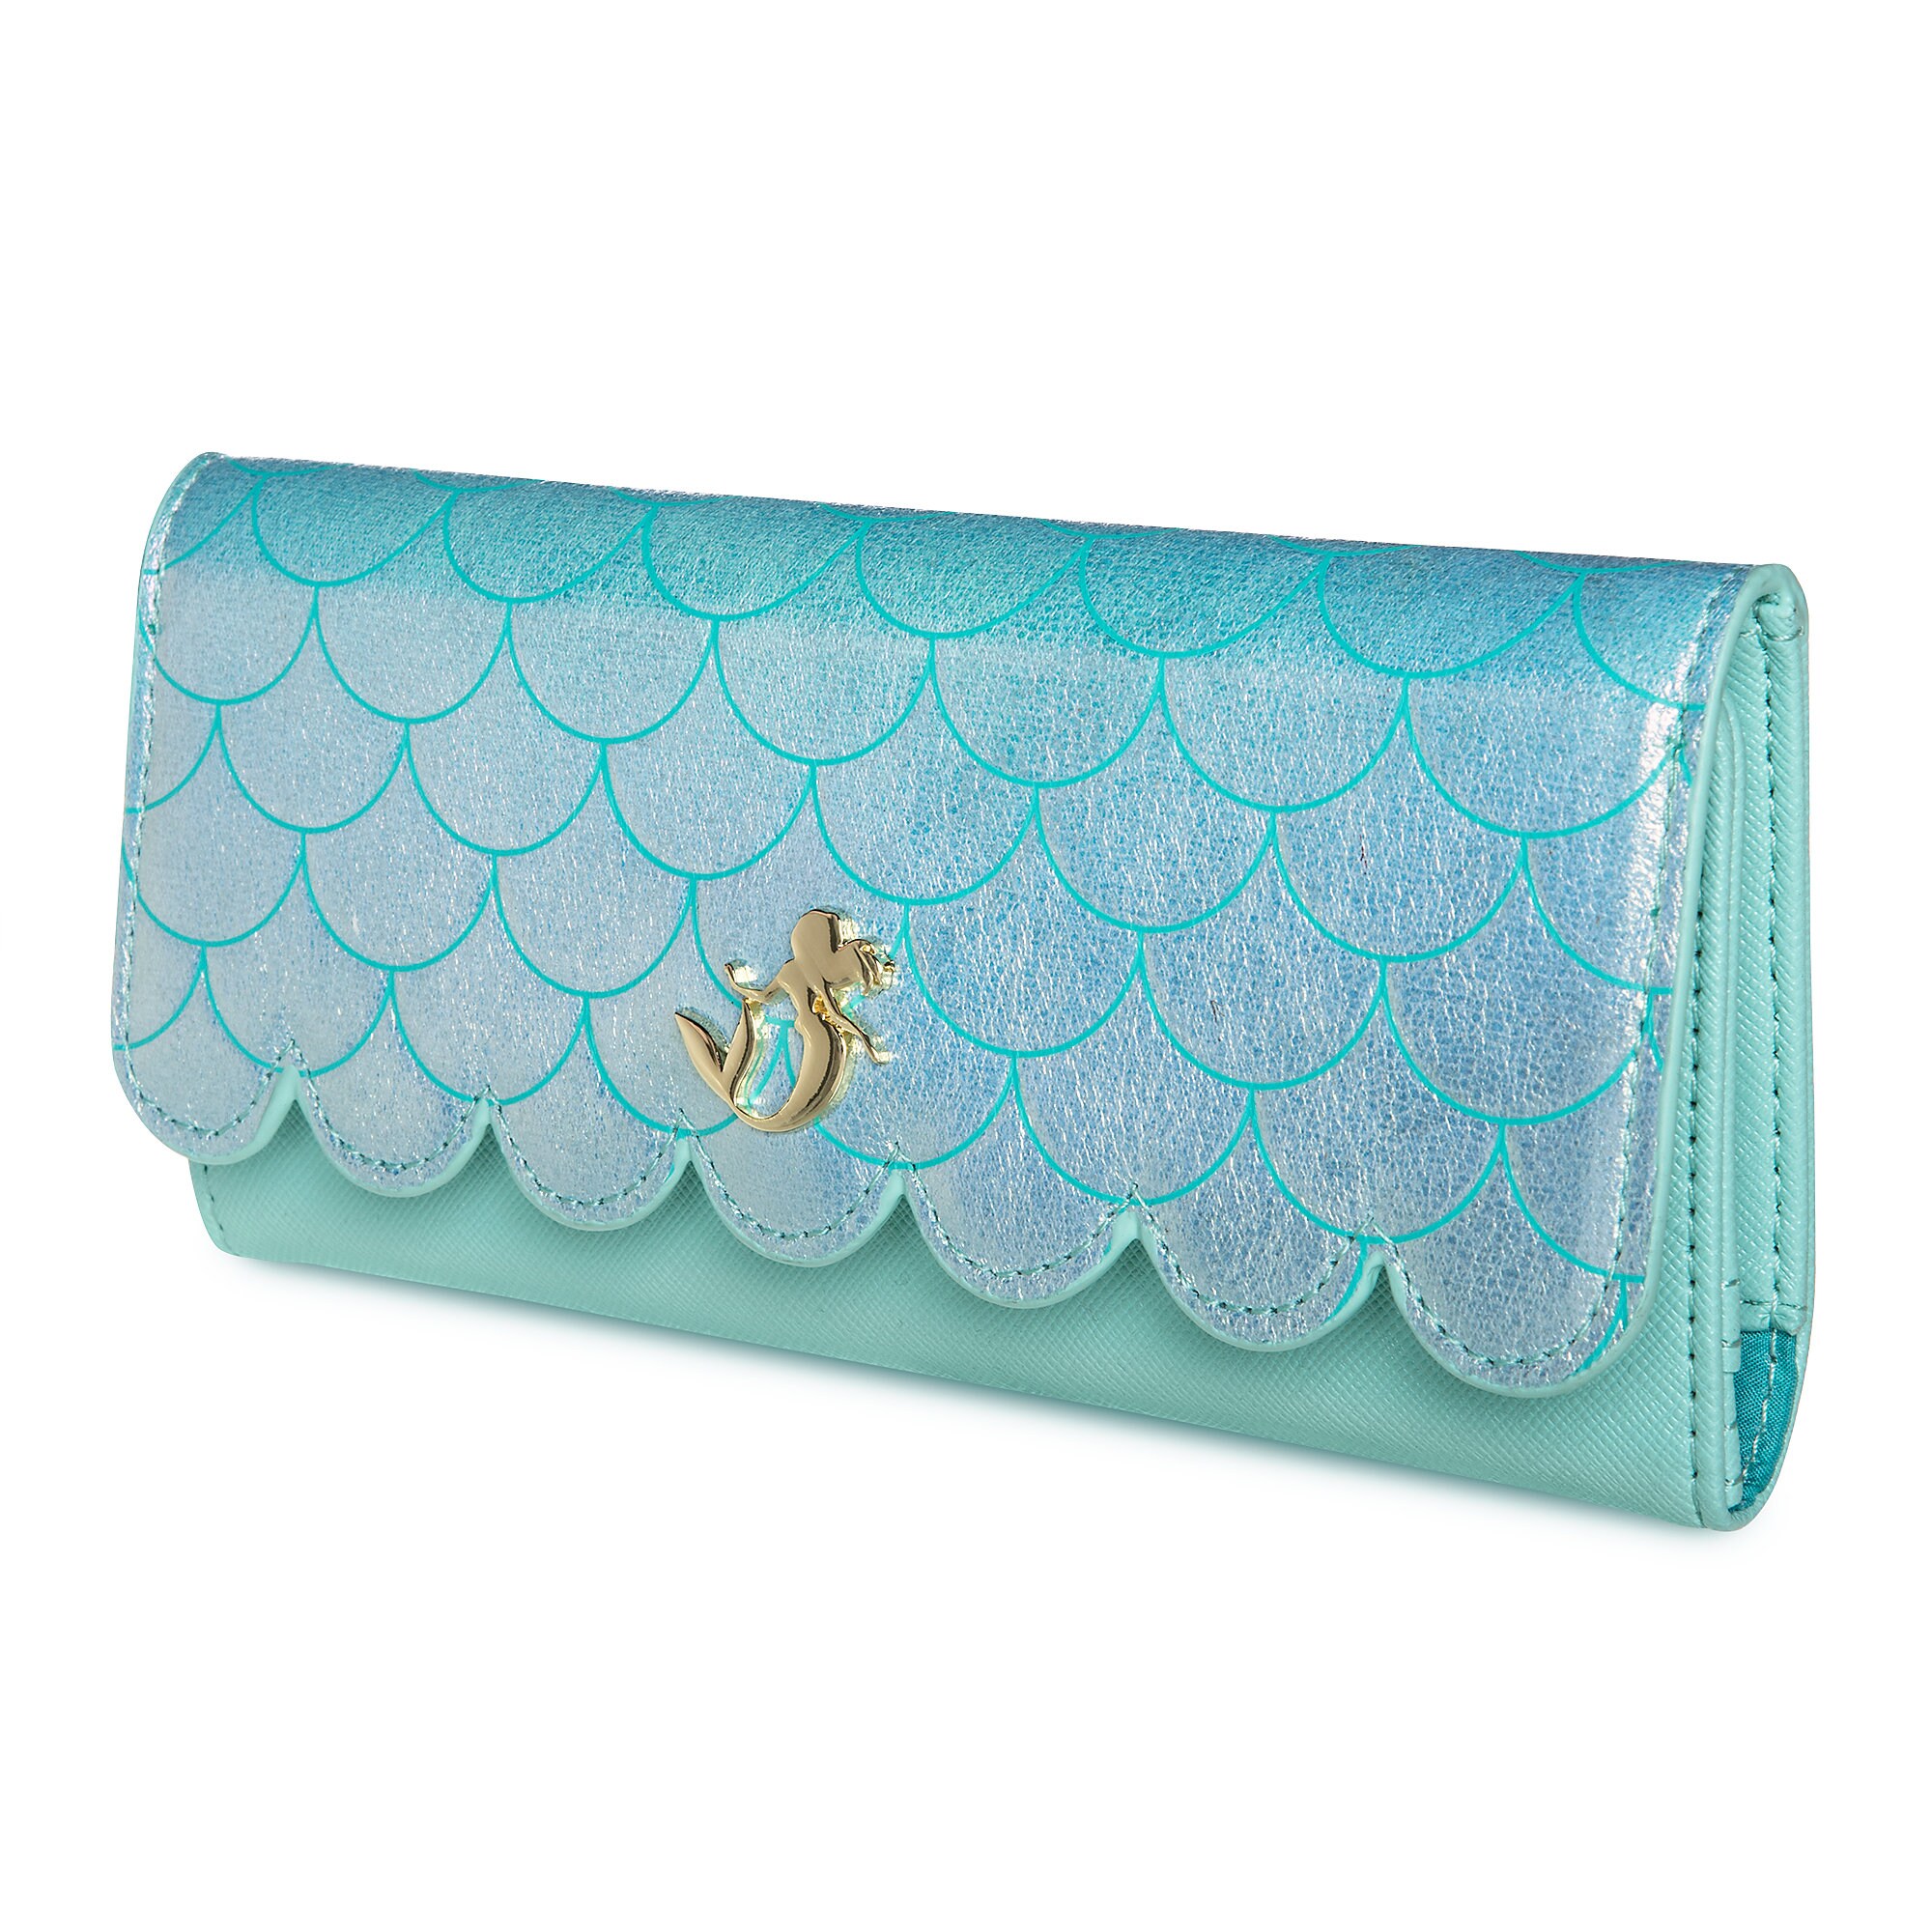 The Little Mermaid Wallet by Loungefly